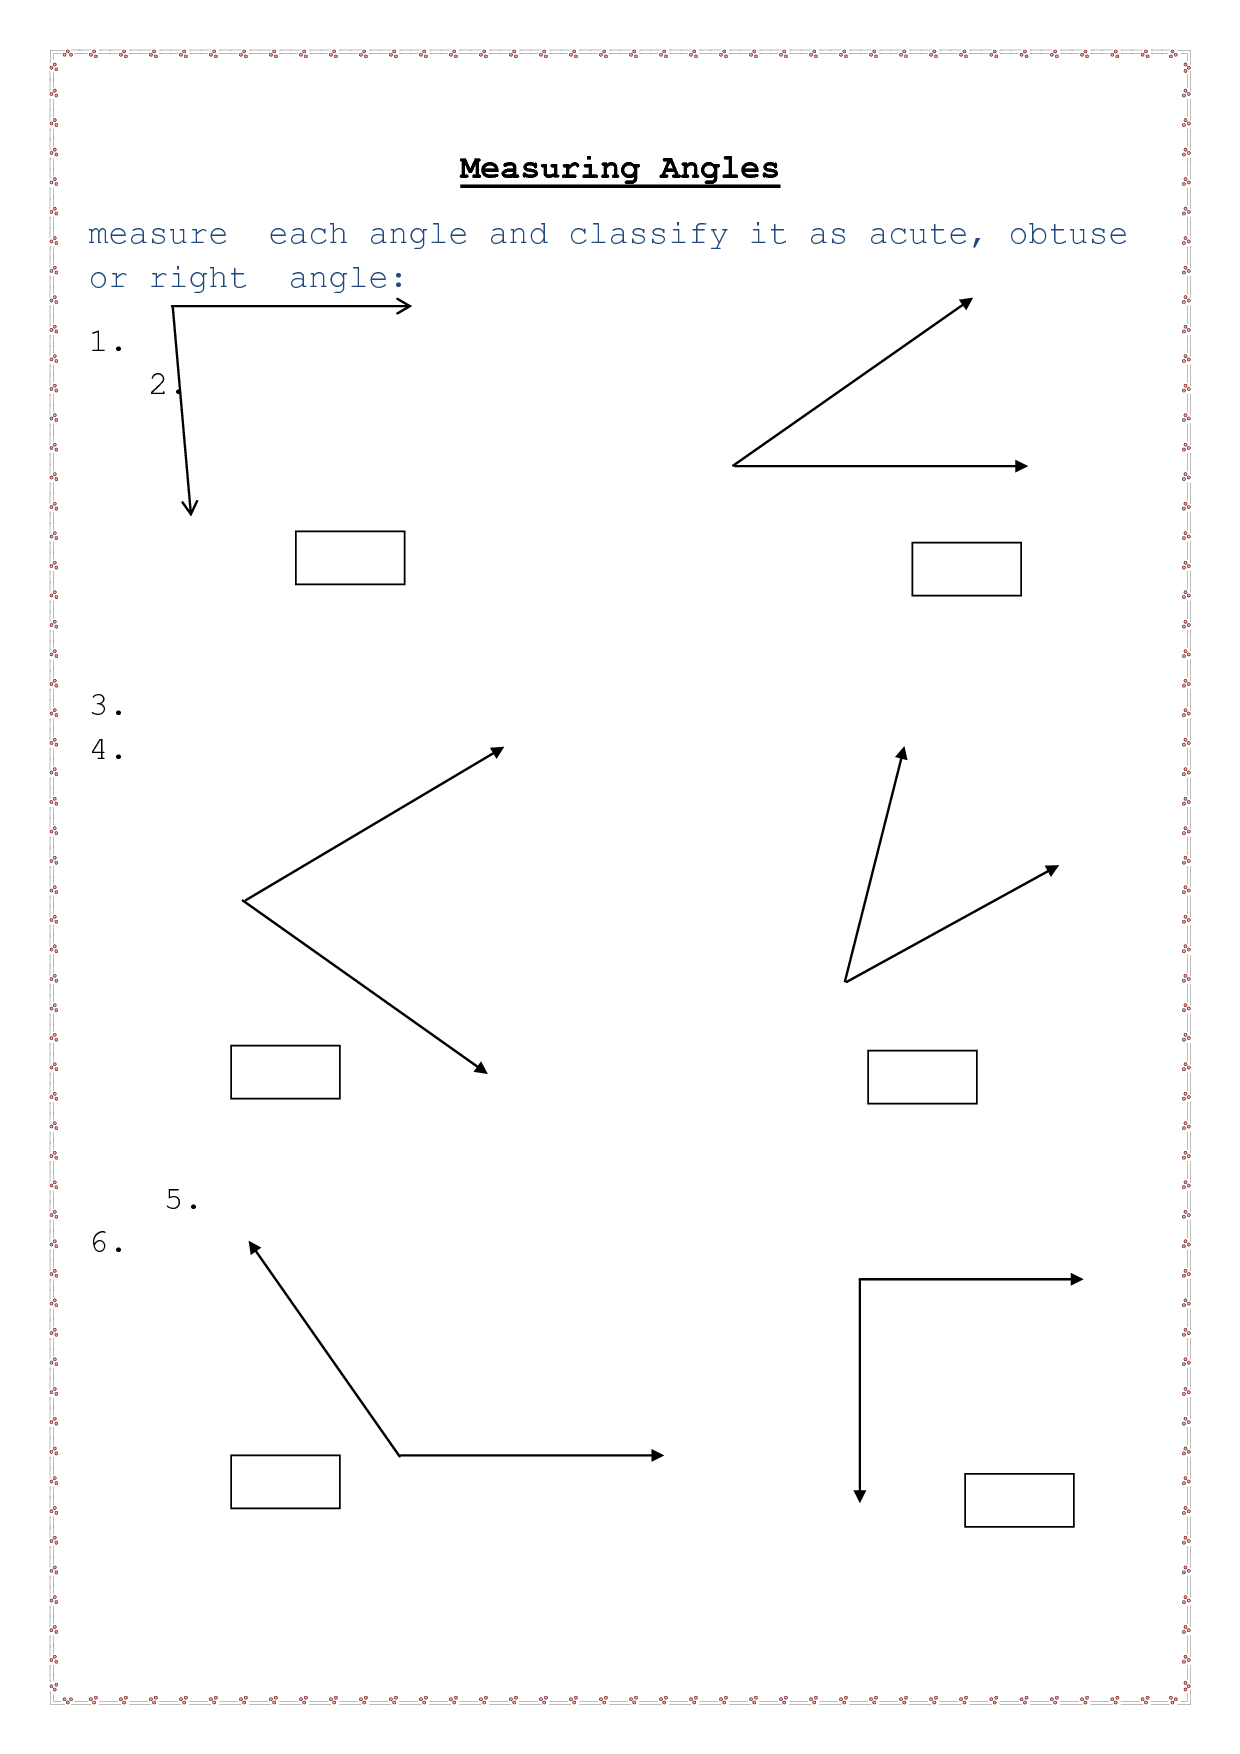 polygons-and-angles-worksheet